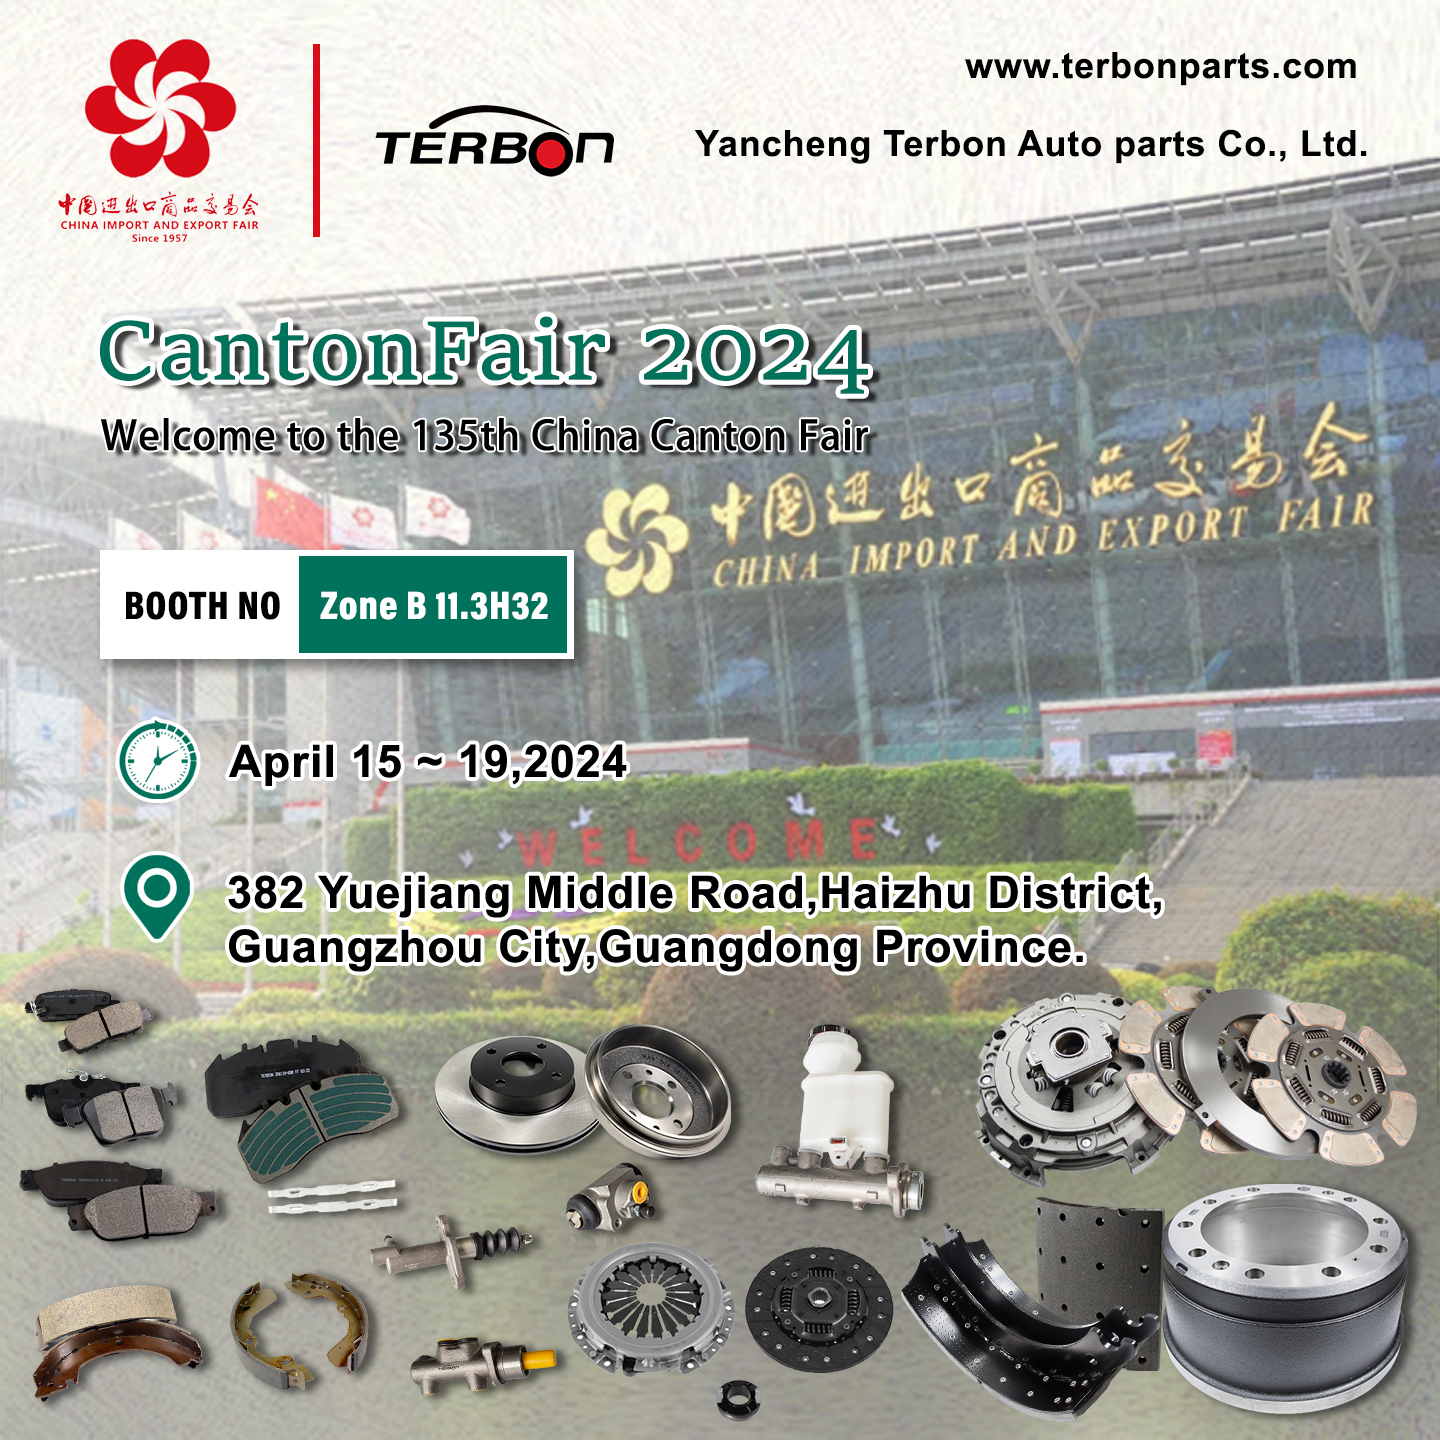 YanCheng Terbon Auto Parts Company Extends Cordial Invitation to Global Partners